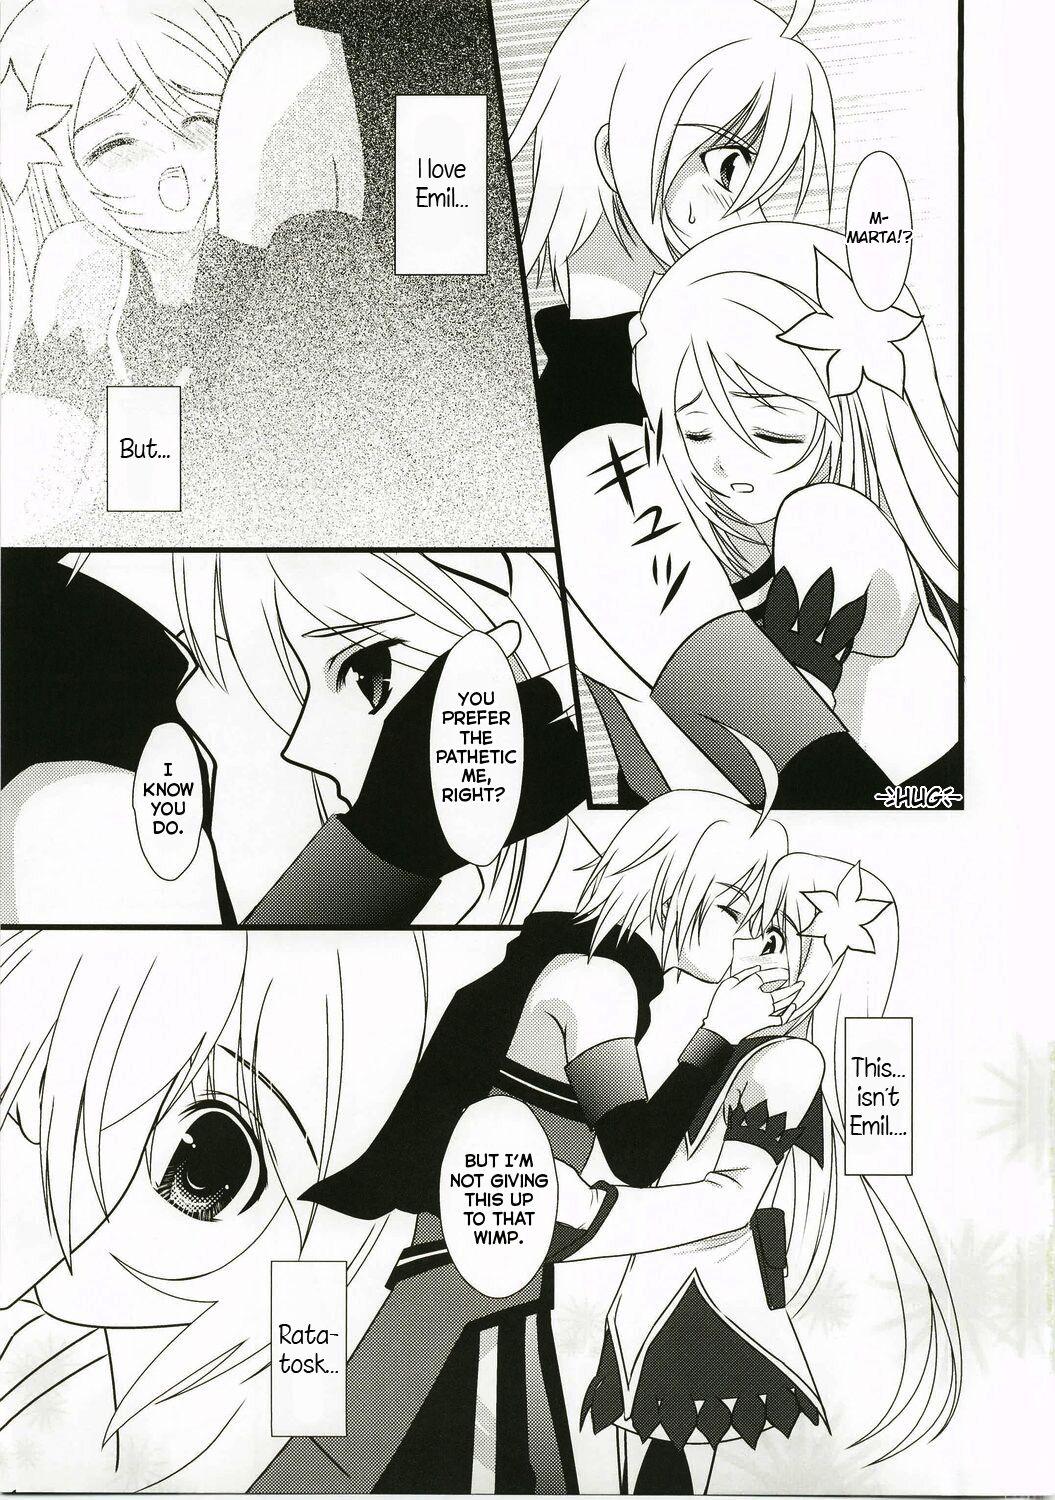 Pussy To Mouth Kimi ha kimi dayo - Tales of symphonia Gay Latino - Page 6